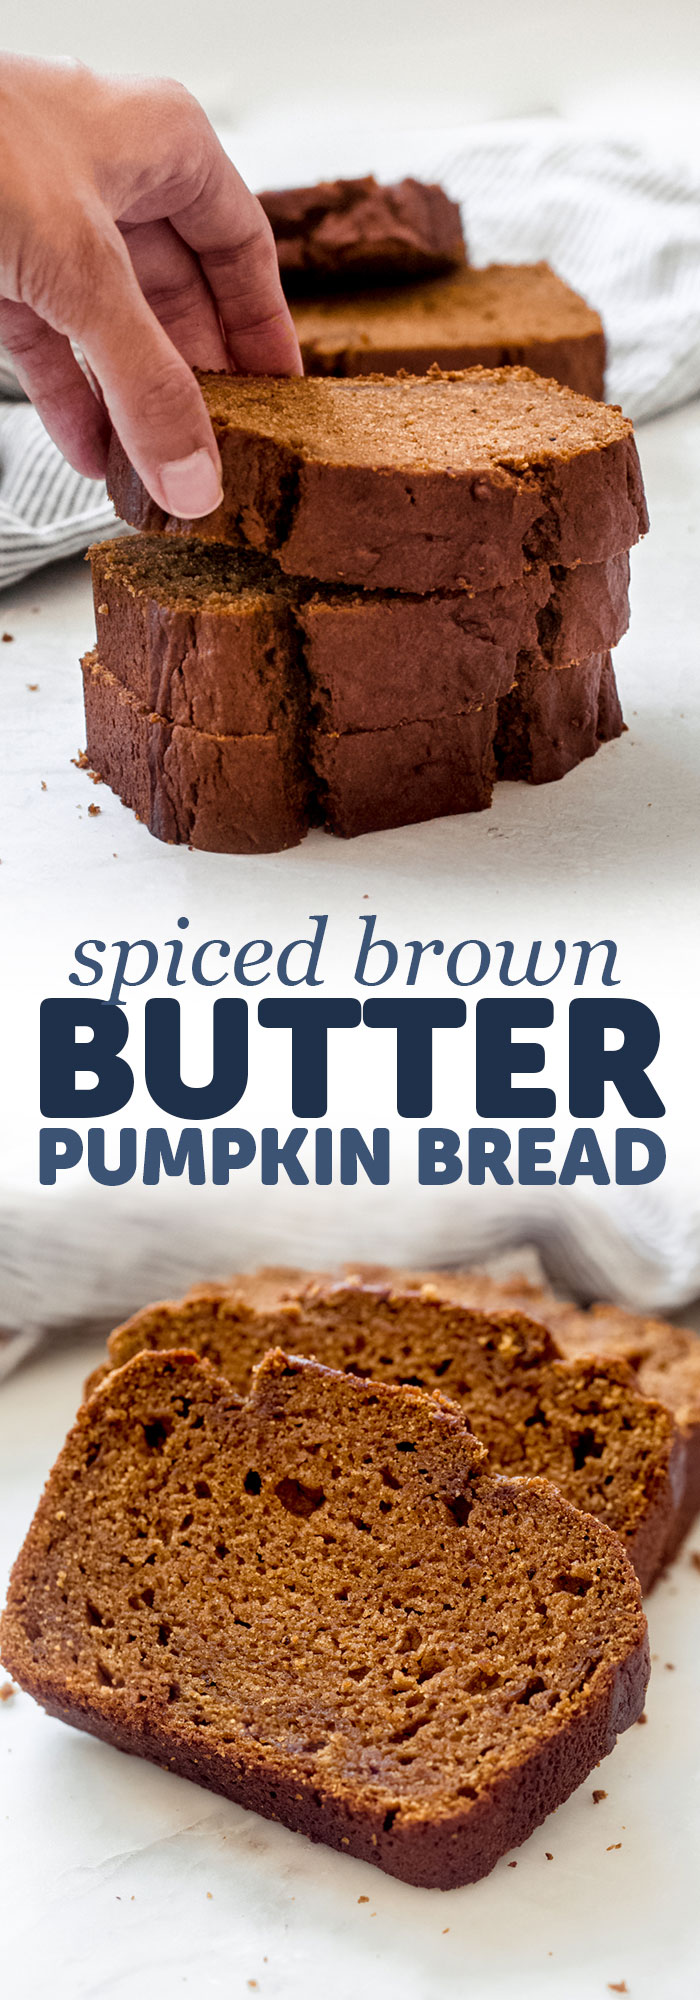 Spiced Brown Butter Pumpkin Bread - an easy recipe for pumpkin bread loaded with a toffee scent and all the fall spices! My recipe uses an entire can of pumpkin puree, leaving you with an uber tender loaf! #pumkinbread #brownbutter #pumpkinloaf #thanksgivingrecipes #pumpkinbreadrecipe | Littlespicejar.com